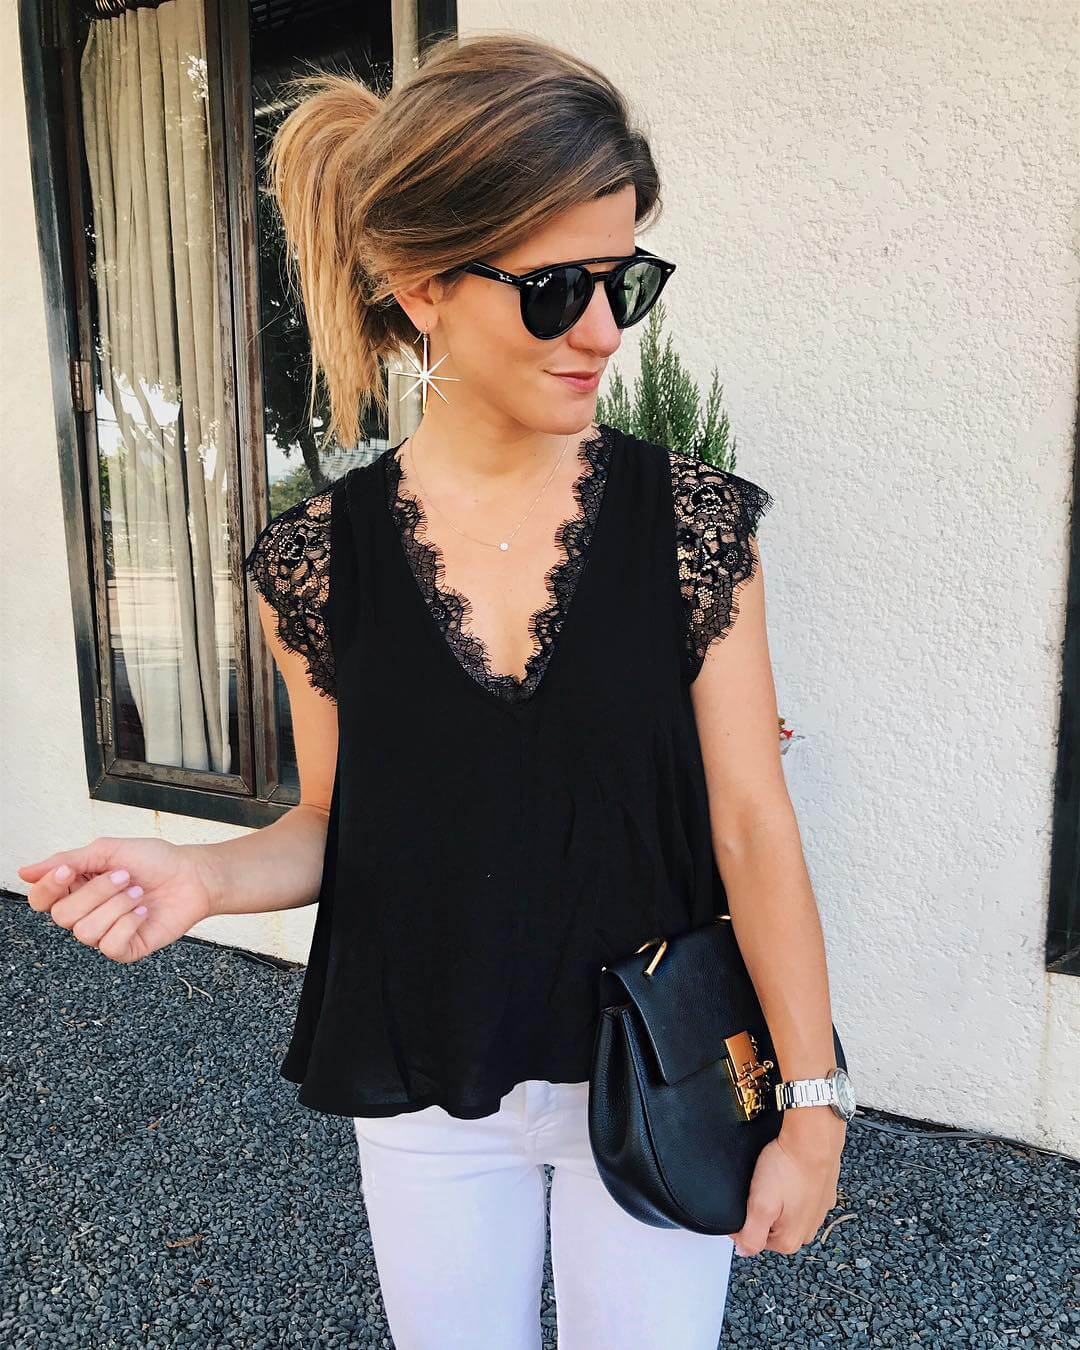 brighton keller wearing black lace top and white jeans 